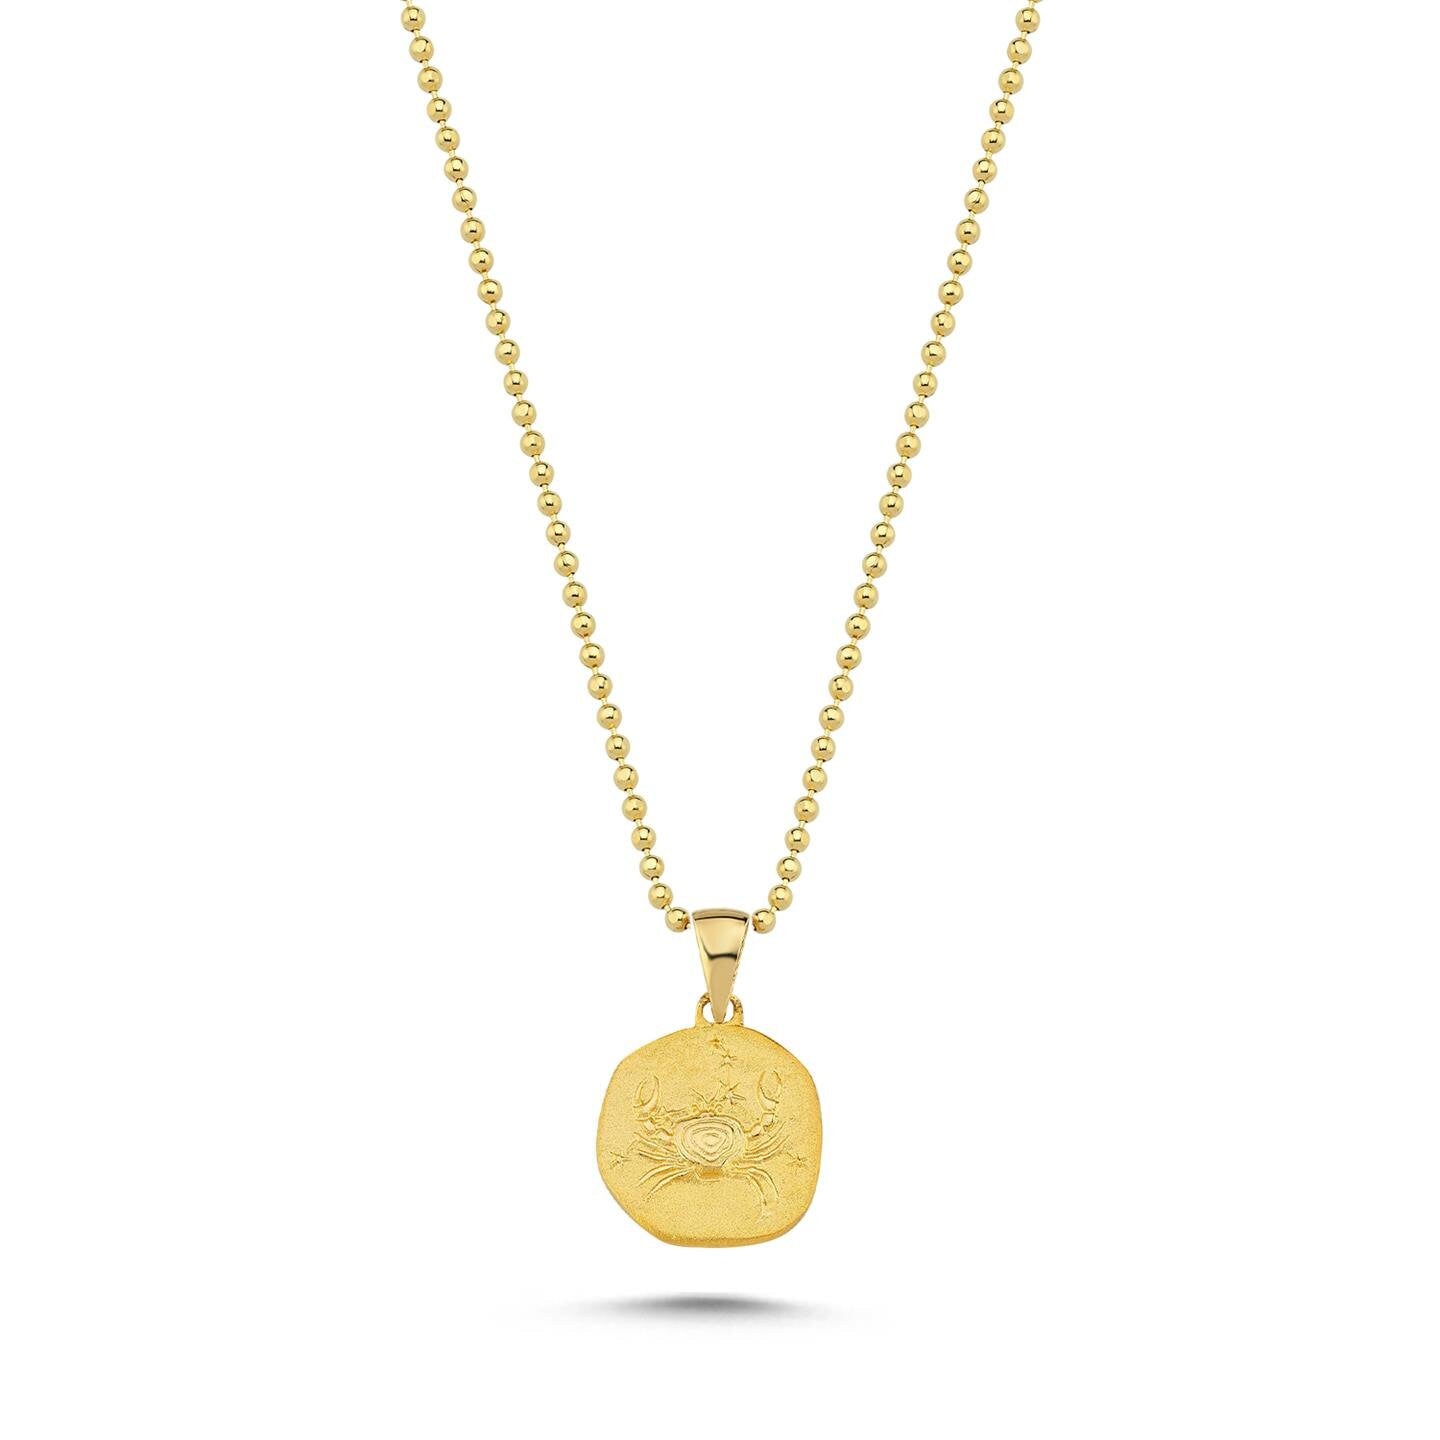 14K Gold Zodiac Cancer Necklace - Cancer Pendant - Ideal Gift for Astrology Enthusiasts